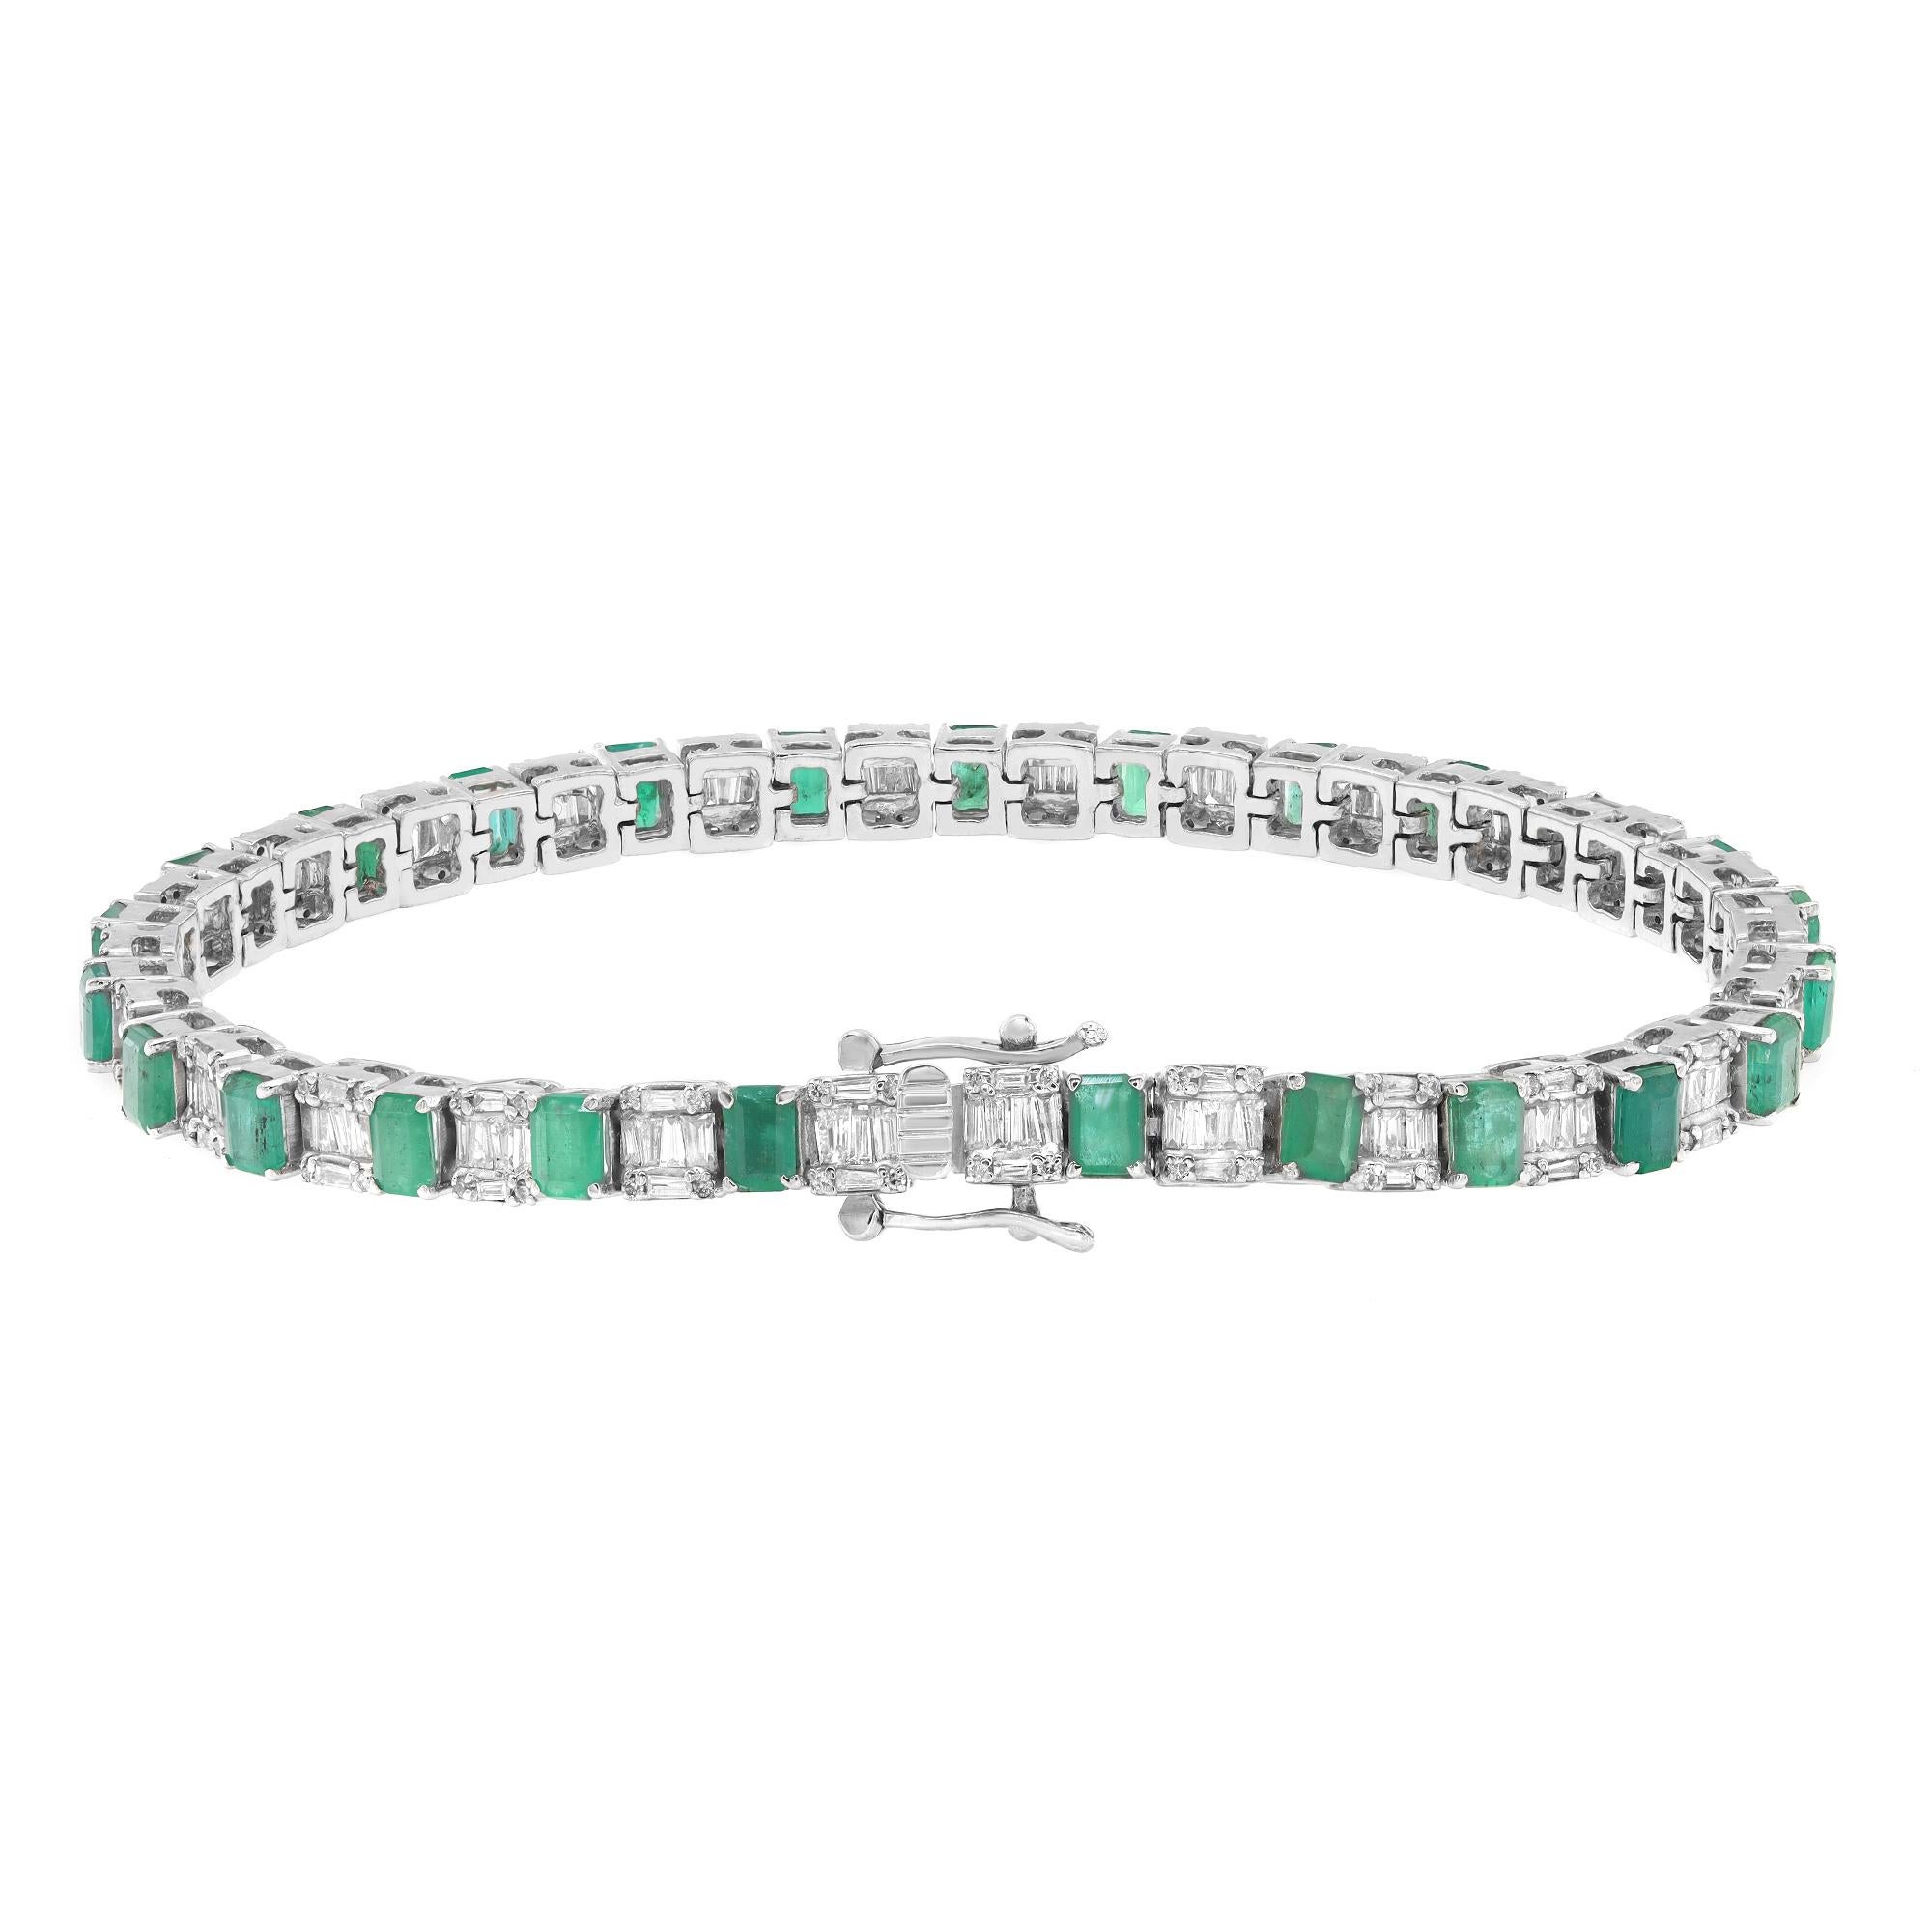 This beautifully crafted tennis bracelet features emerald cut emeralds with baguette and round cut diamonds in prong and channel setting. Crafted in 14k white gold. Total diamond weight: 2.48 carats. Diamond Quality: G-H color and SI clarity. Total